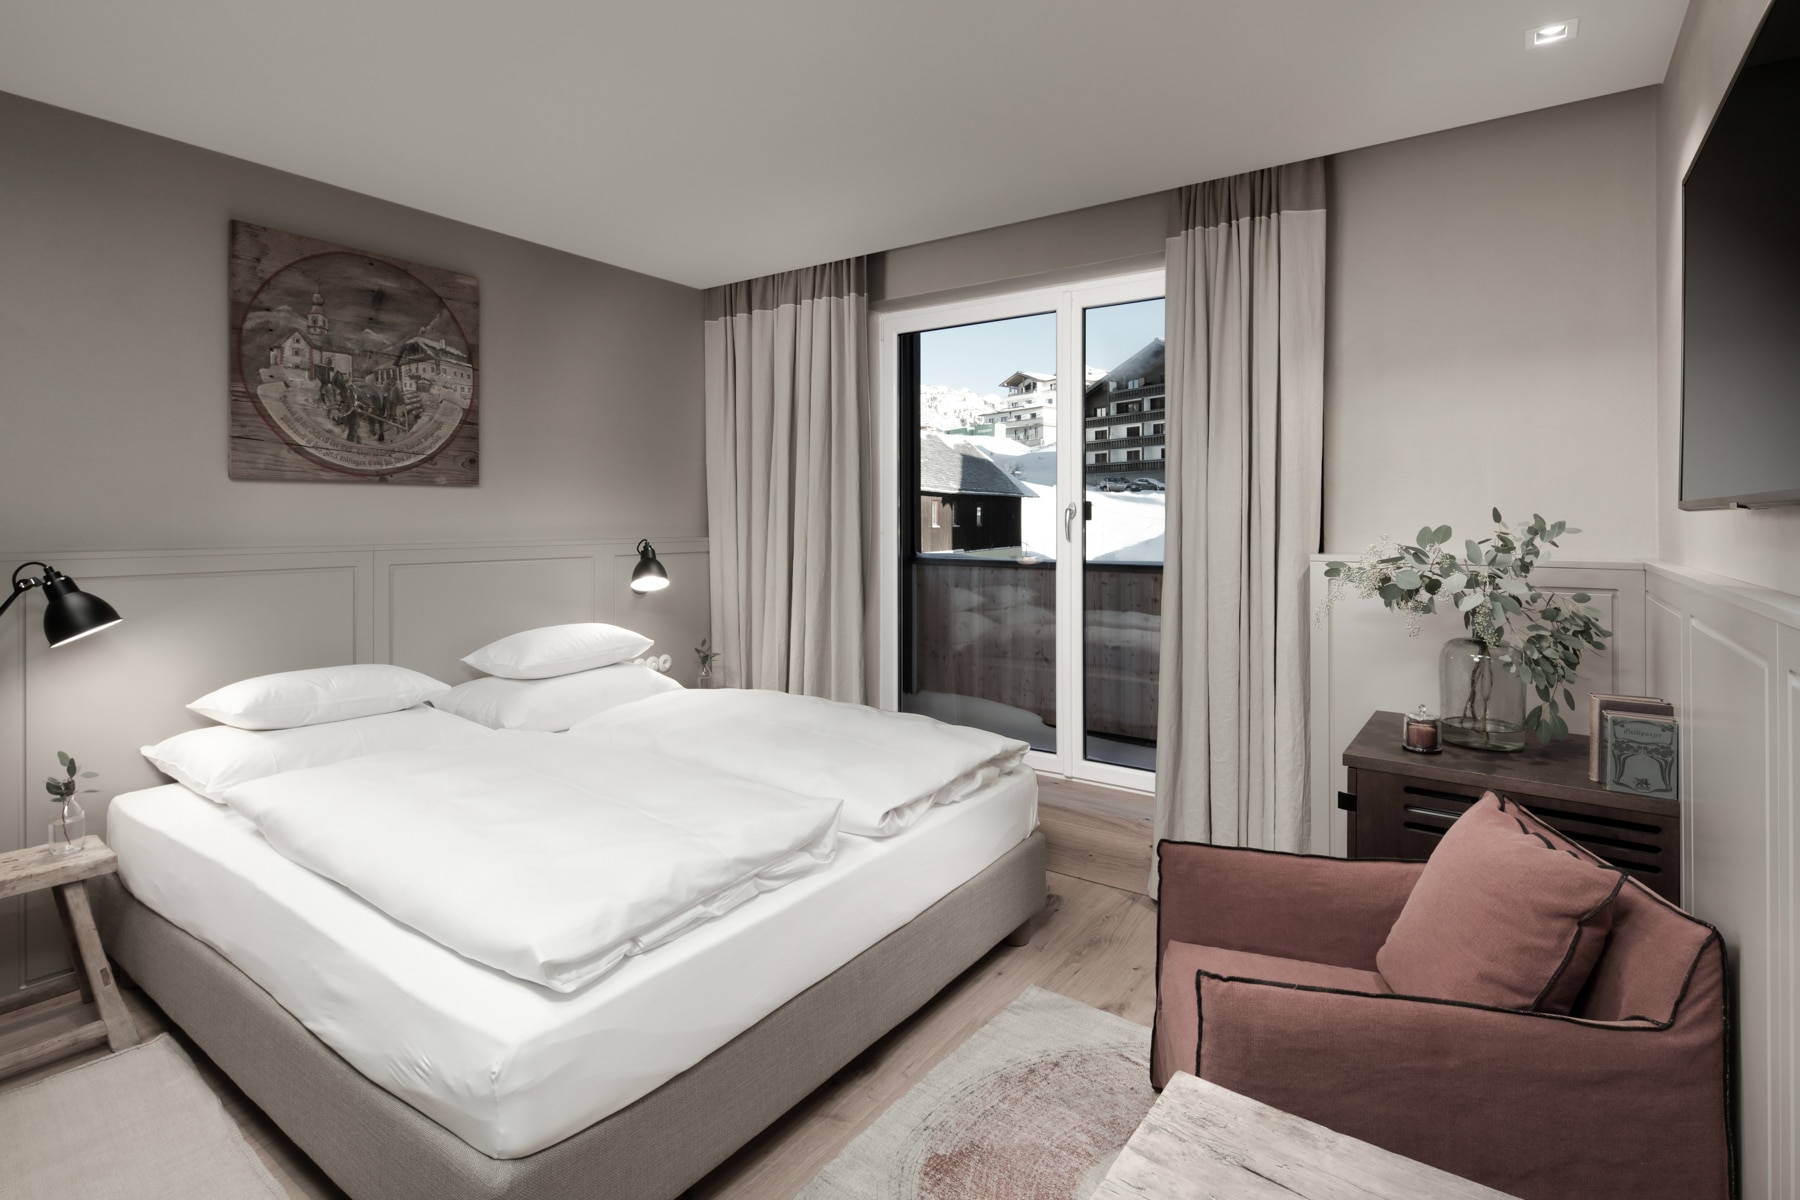 A modern and cozy bedroom featuring a large bed with white linens, an armchair by the window, and tasteful decorations, with a view of urban surroundings.